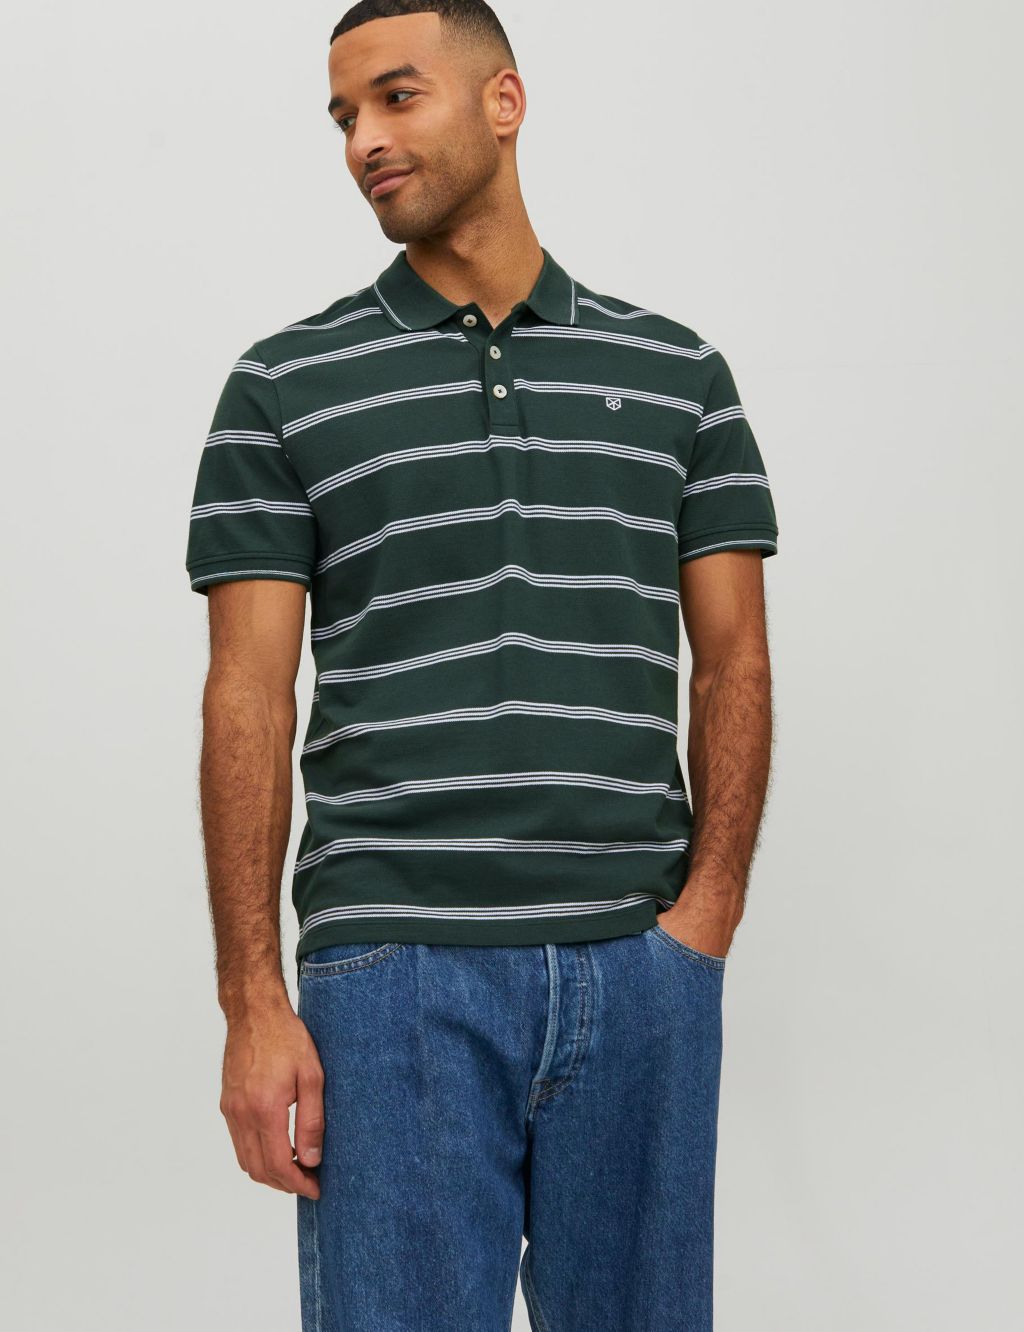 Pure Cotton Striped Tipped Polo Shirt image 1